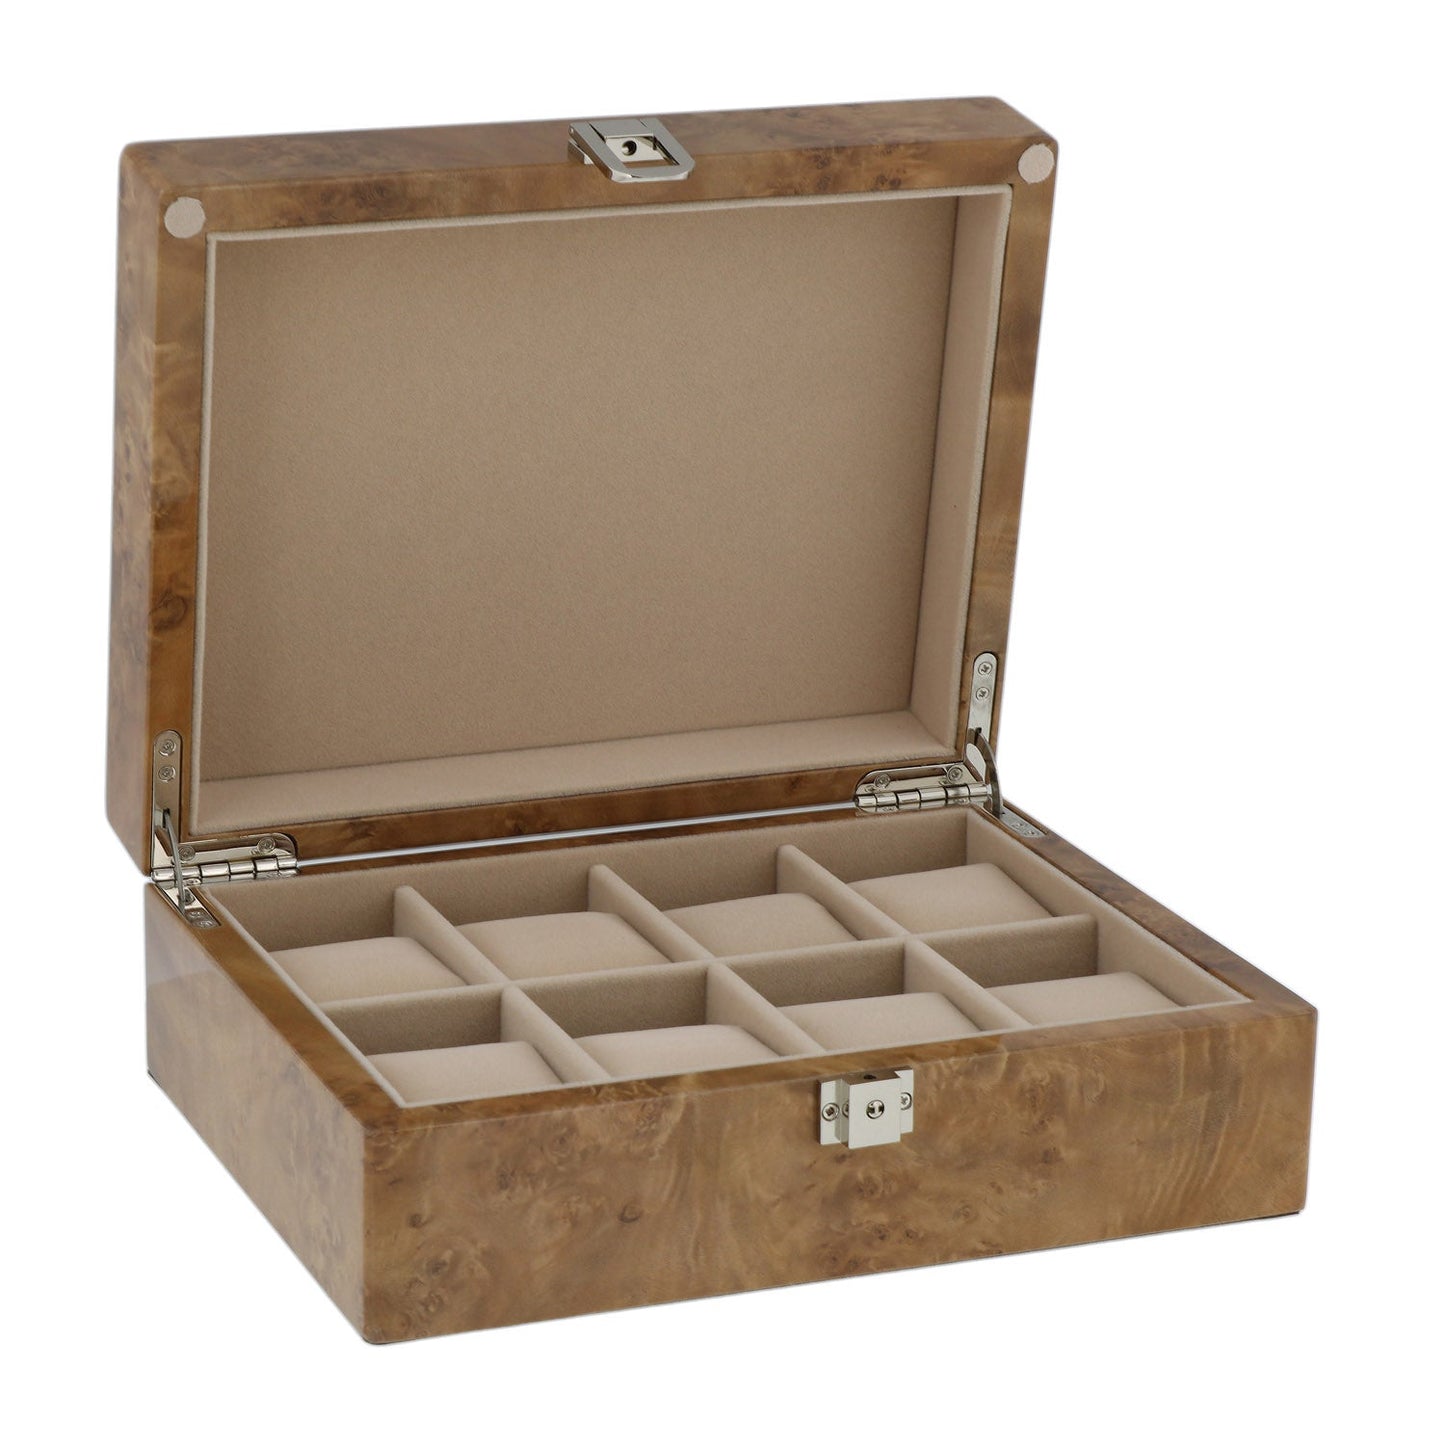 Light Burl Walnut Wood Watch Collectors Box for 8 Watches by Aevitas